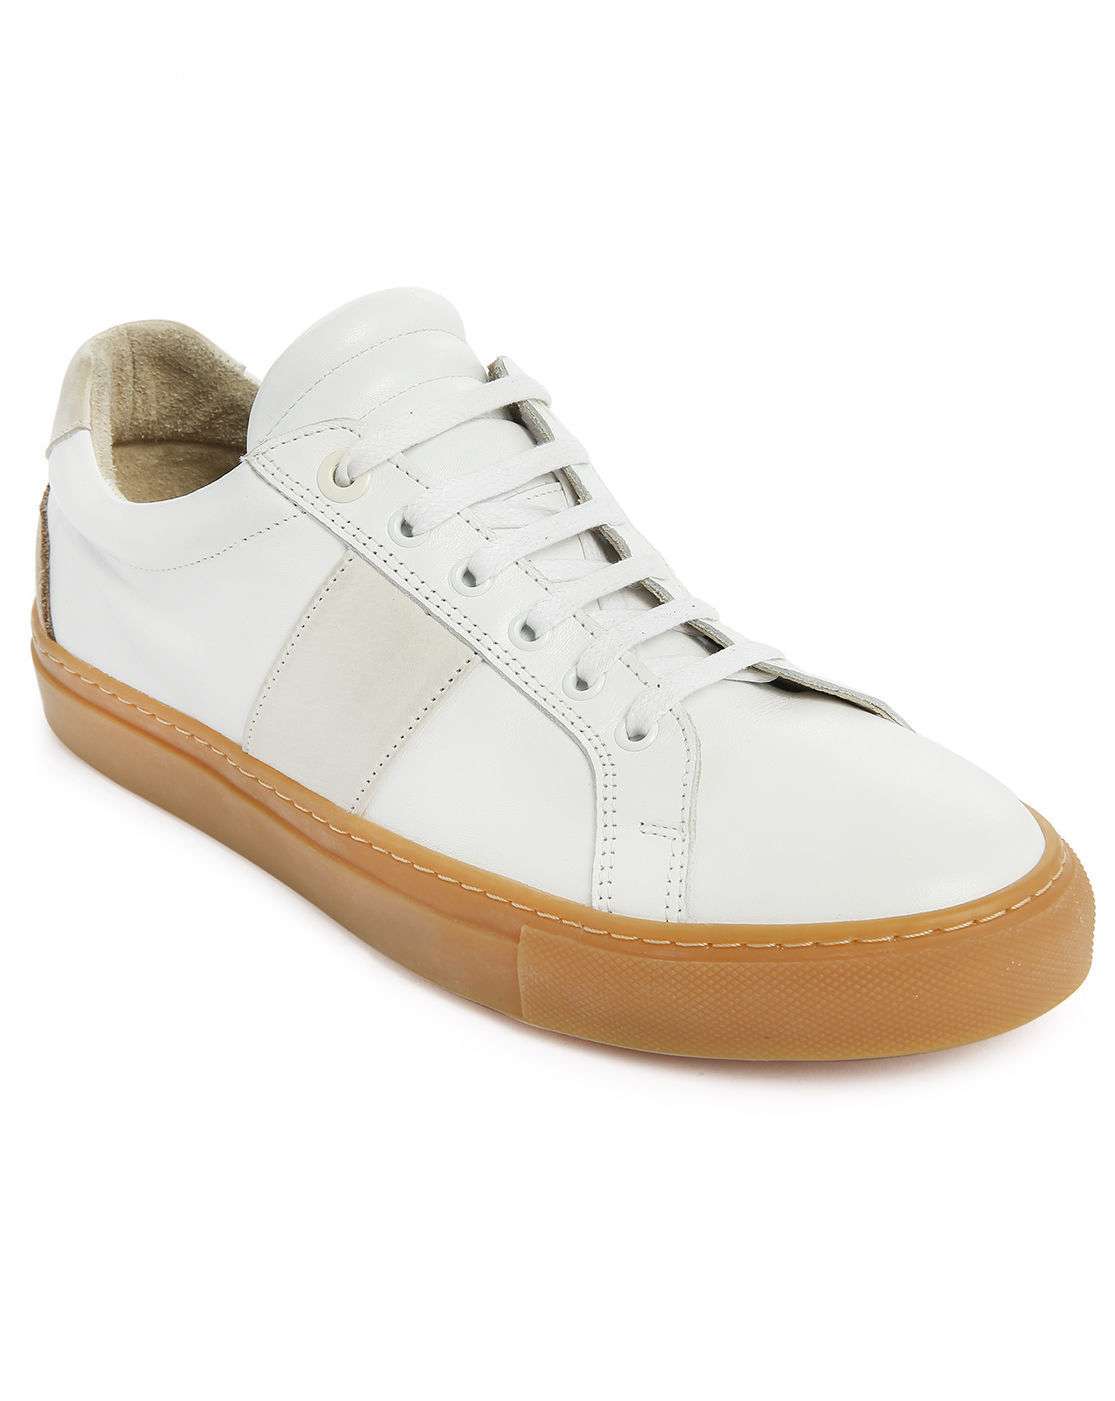 National standard Edition 4 White Leather Gum Sole ...